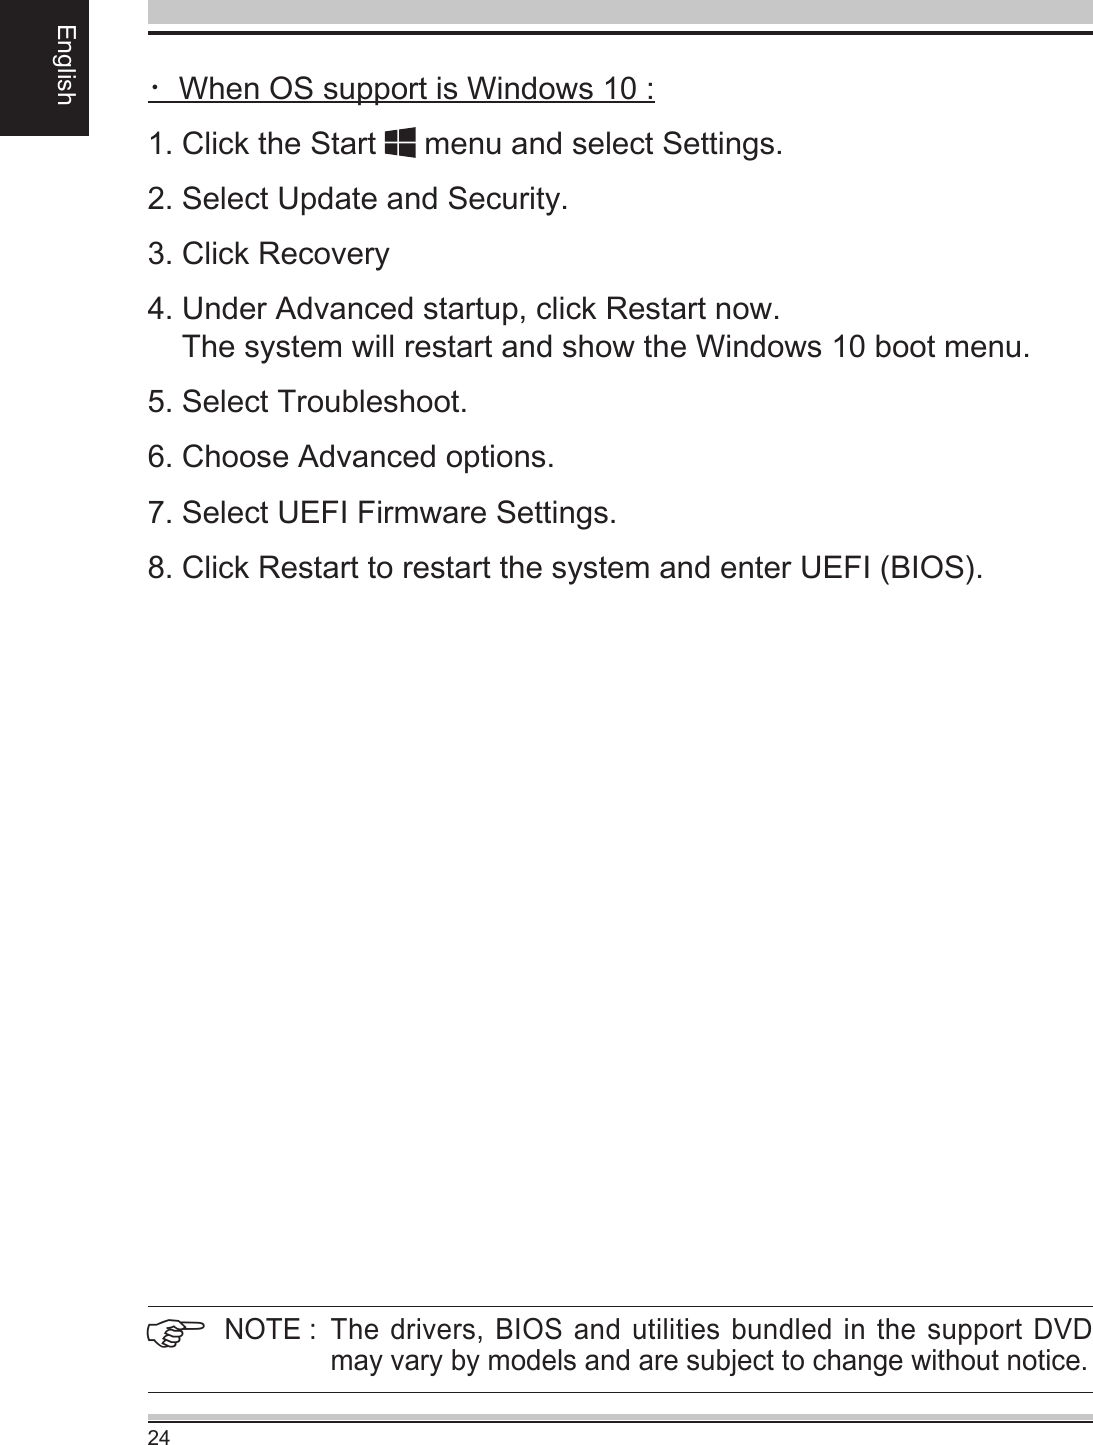 24English・ When OS support is Windows 10 :1.  Click the Start   menu and select Settings.2.  Select Update and Security.3.  Click Recovery4.  Under Advanced startup, click Restart now.  The system will restart and show the Windows 10 boot menu.5. Select Troubleshoot.6.  Choose Advanced options.7. Select UEFI Firmware Settings.8. Click Restart to restart the system and enter UEFI (BIOS).NOTE :  The drivers, BIOS and utilities bundled  in the support DVD may vary by models and are subject to change without notice.